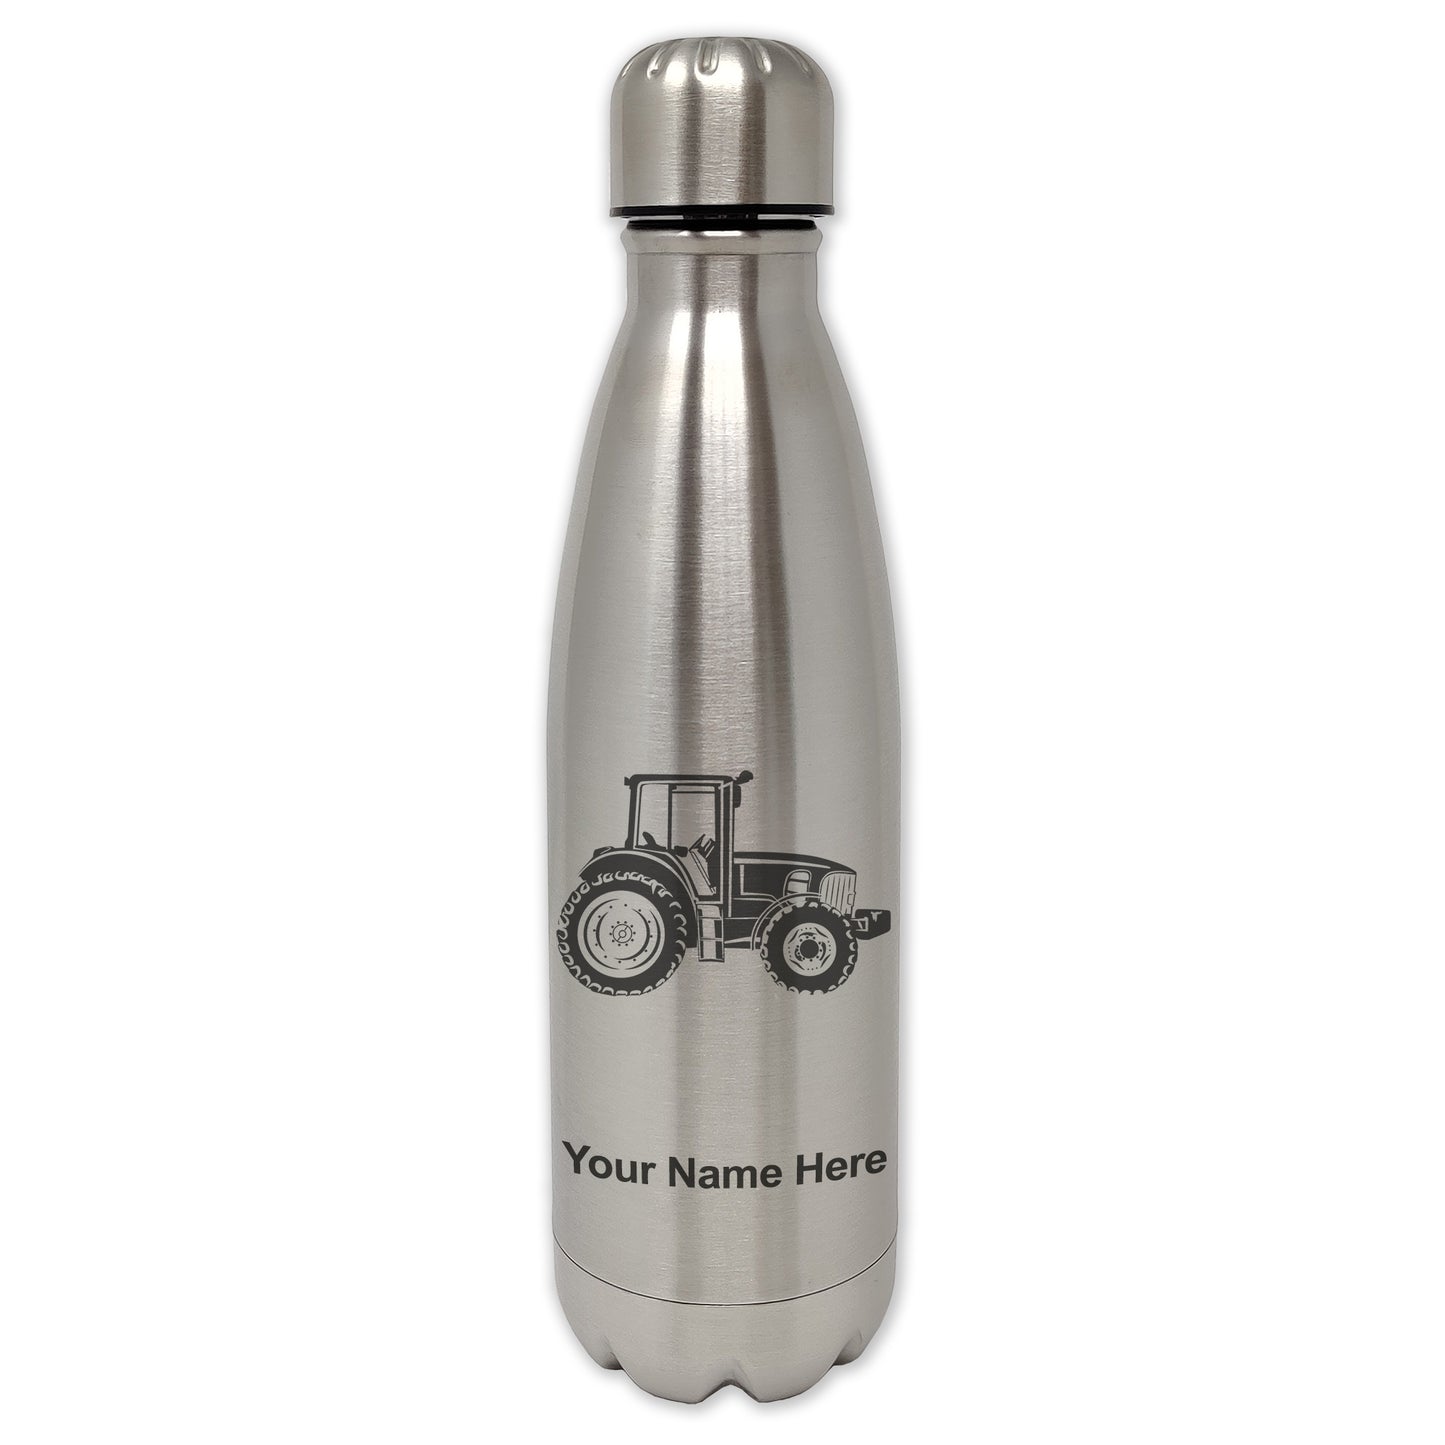 LaserGram Single Wall Water Bottle, Farm Tractor, Personalized Engraving Included